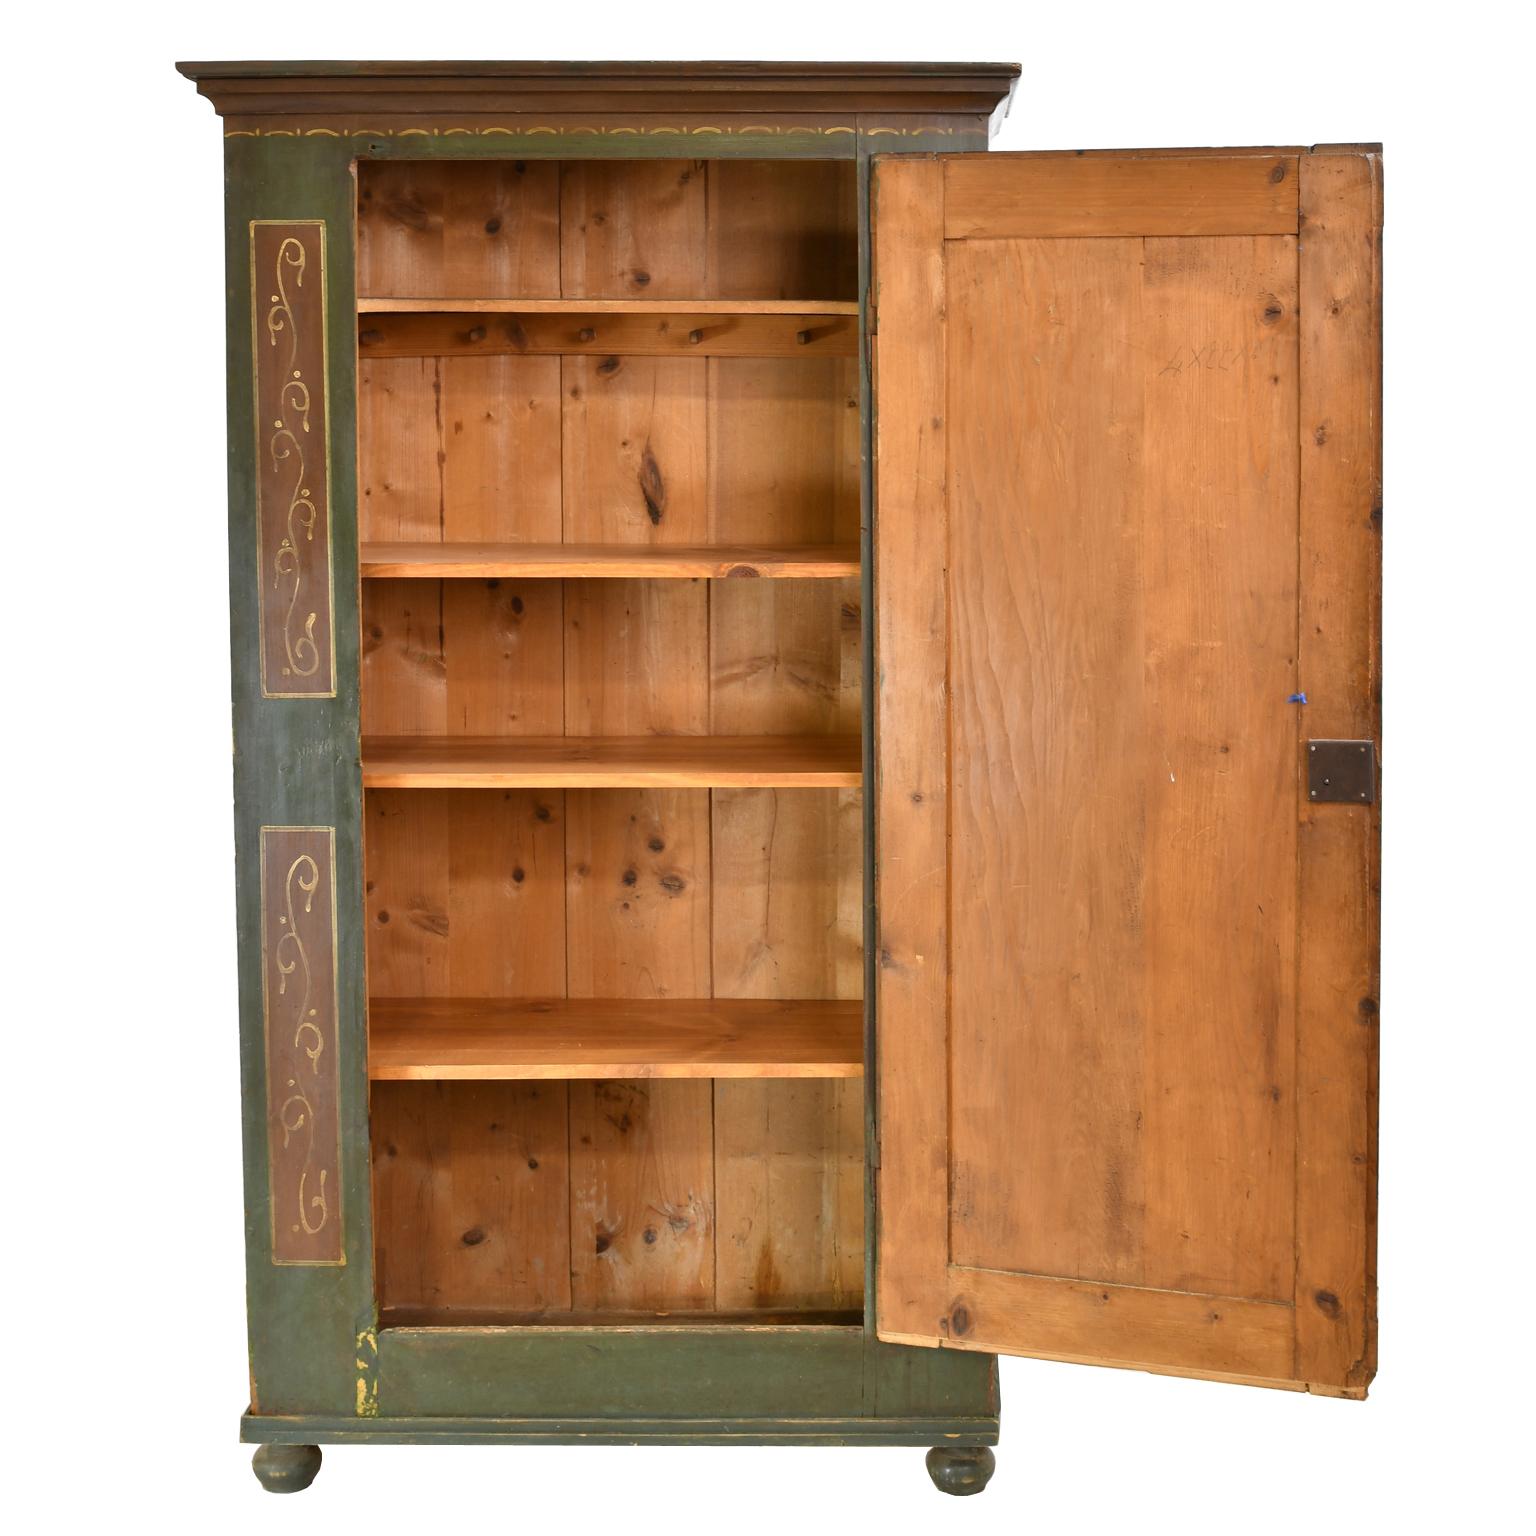 A lovely wedding or dowry armoire with the original painted finish, and dated 1798. The dark green background of the armoire is broken by maroon-colored sides, crown molding and painted panels with foliate design. The single door offers a floral